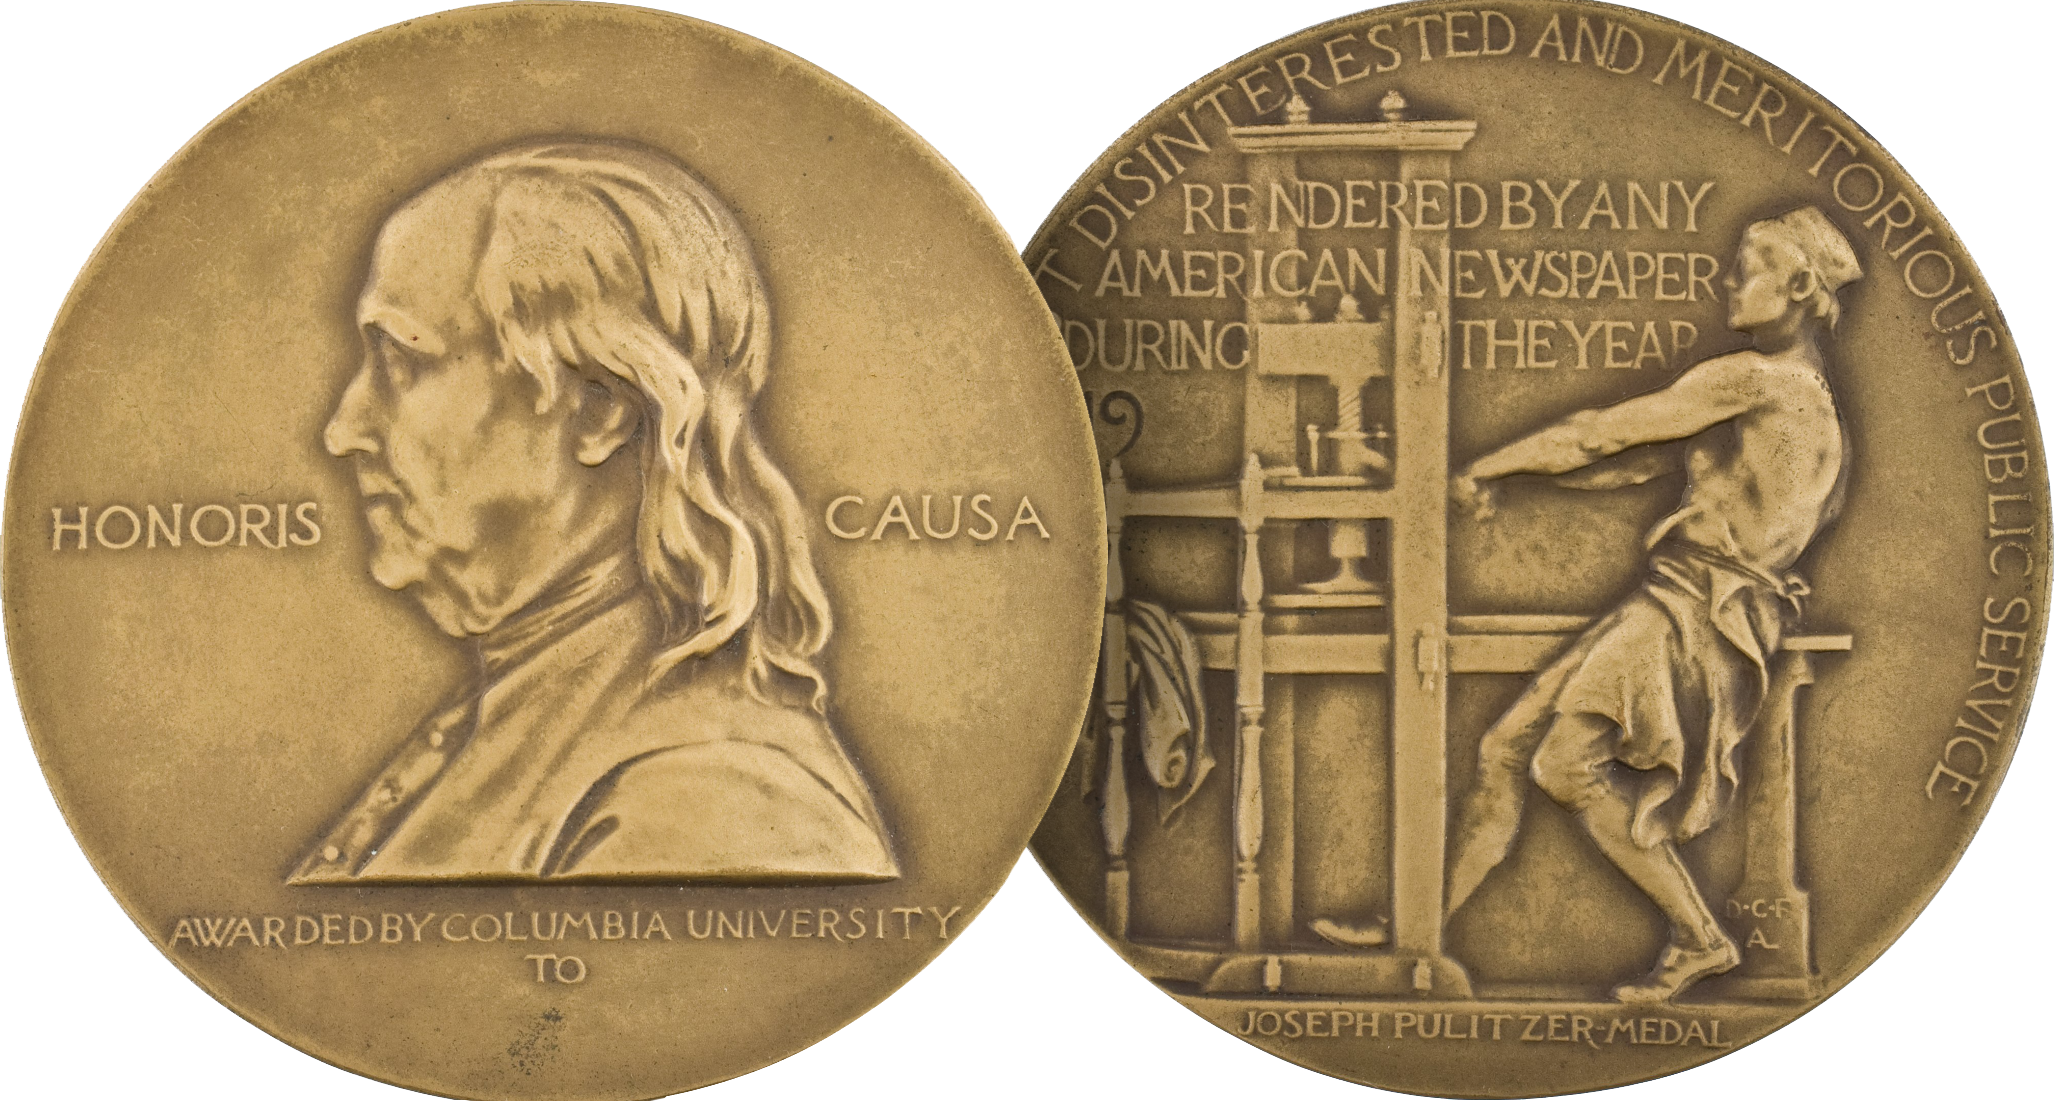 The front and back sides of a Pulitzer Prize medal